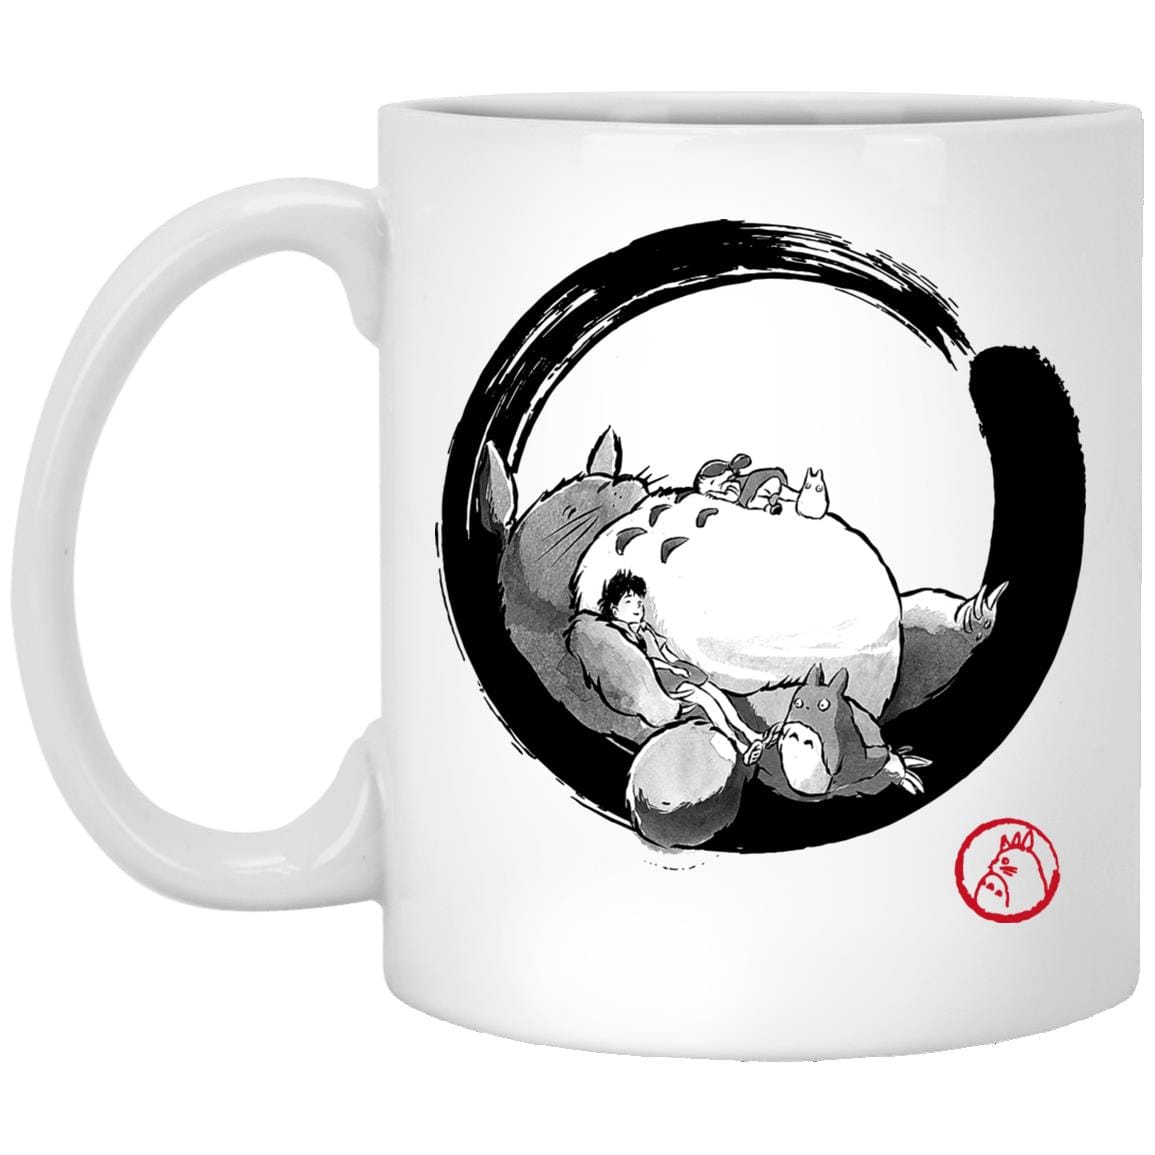 Totoro Family and the Girls in Black and White Mug